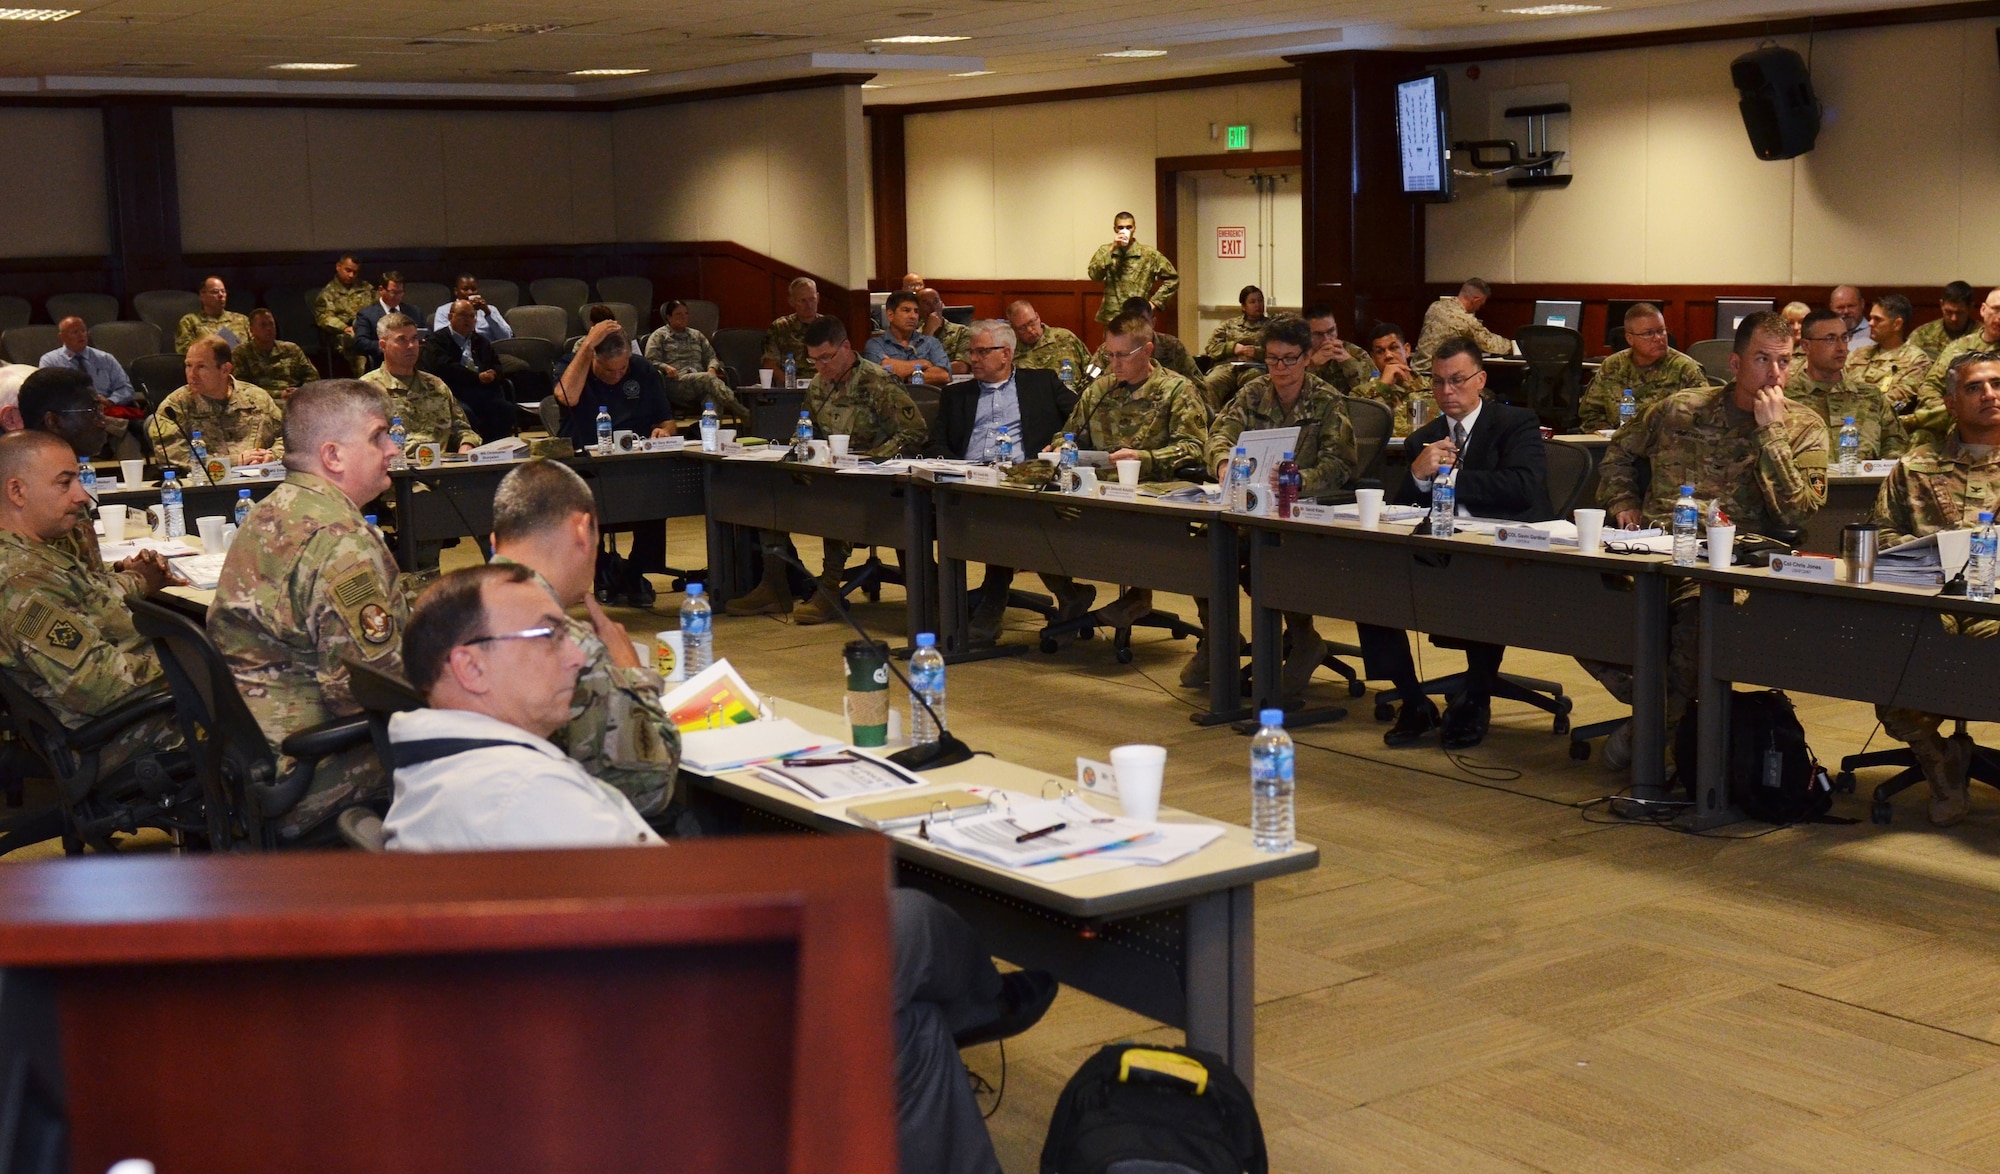 Logistics and Engineering professionals throughout the Department of Defense discuss logistics at the 2018 Joint Logistics Coordination Board at Al Udeid Air Base, Qatar 9 May, 2018. The JLCB conducts planning sessions to better facilitate support to military operations in CENTCOM’s area of responsibility.